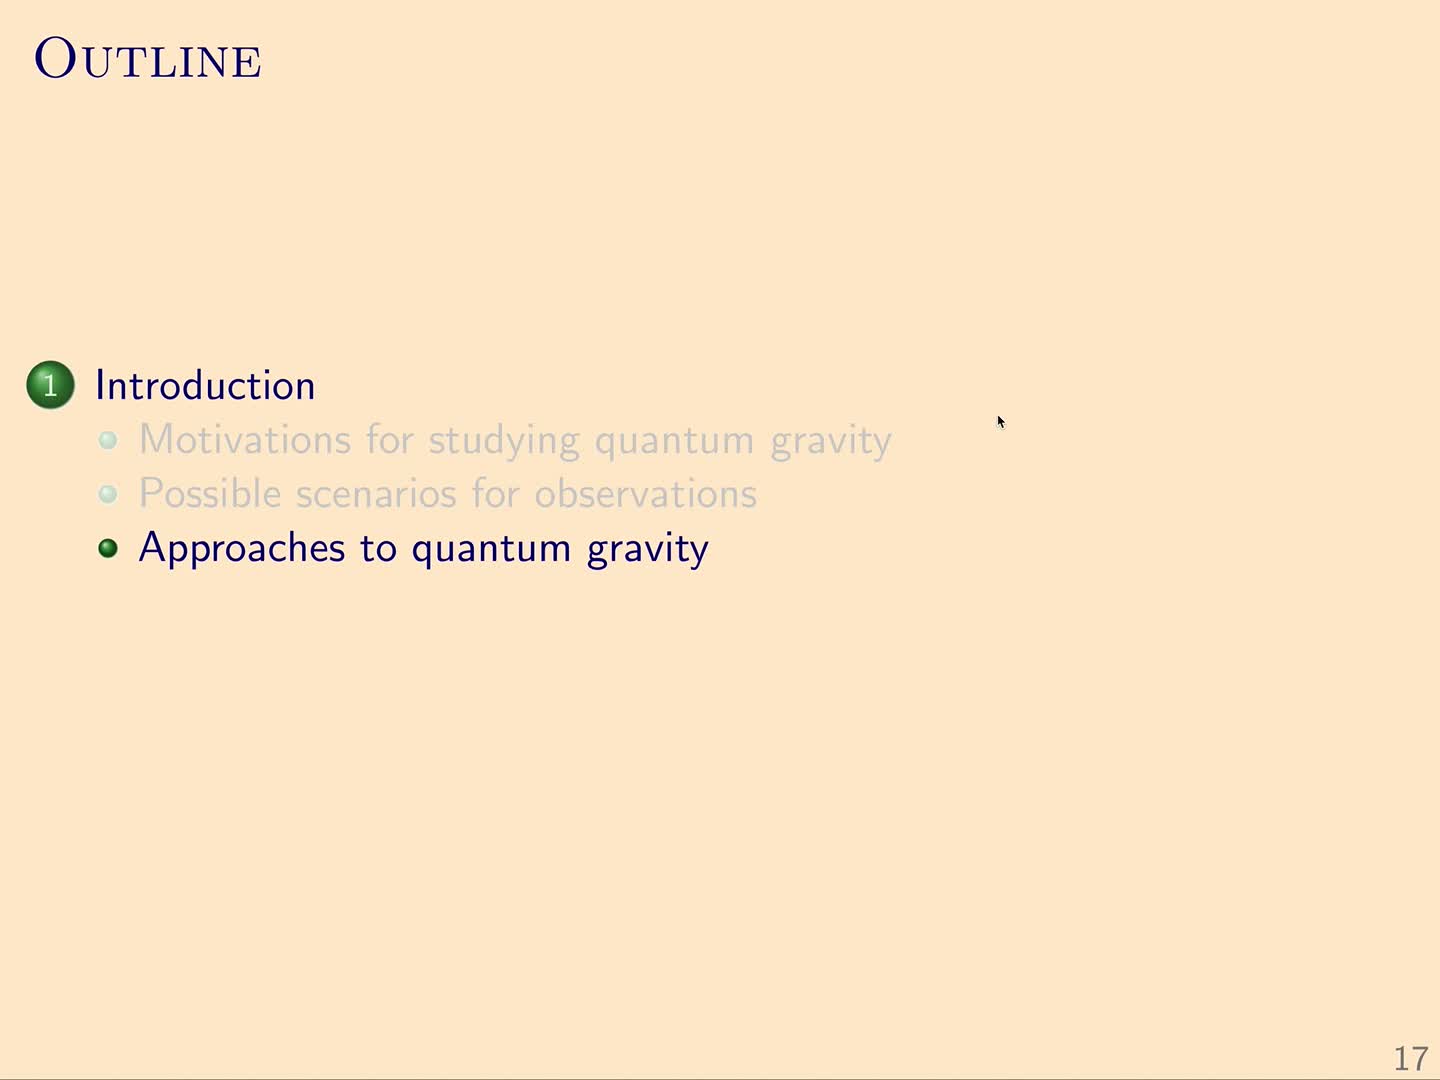 QG I: 1.3 - Approaches to quantum gravity